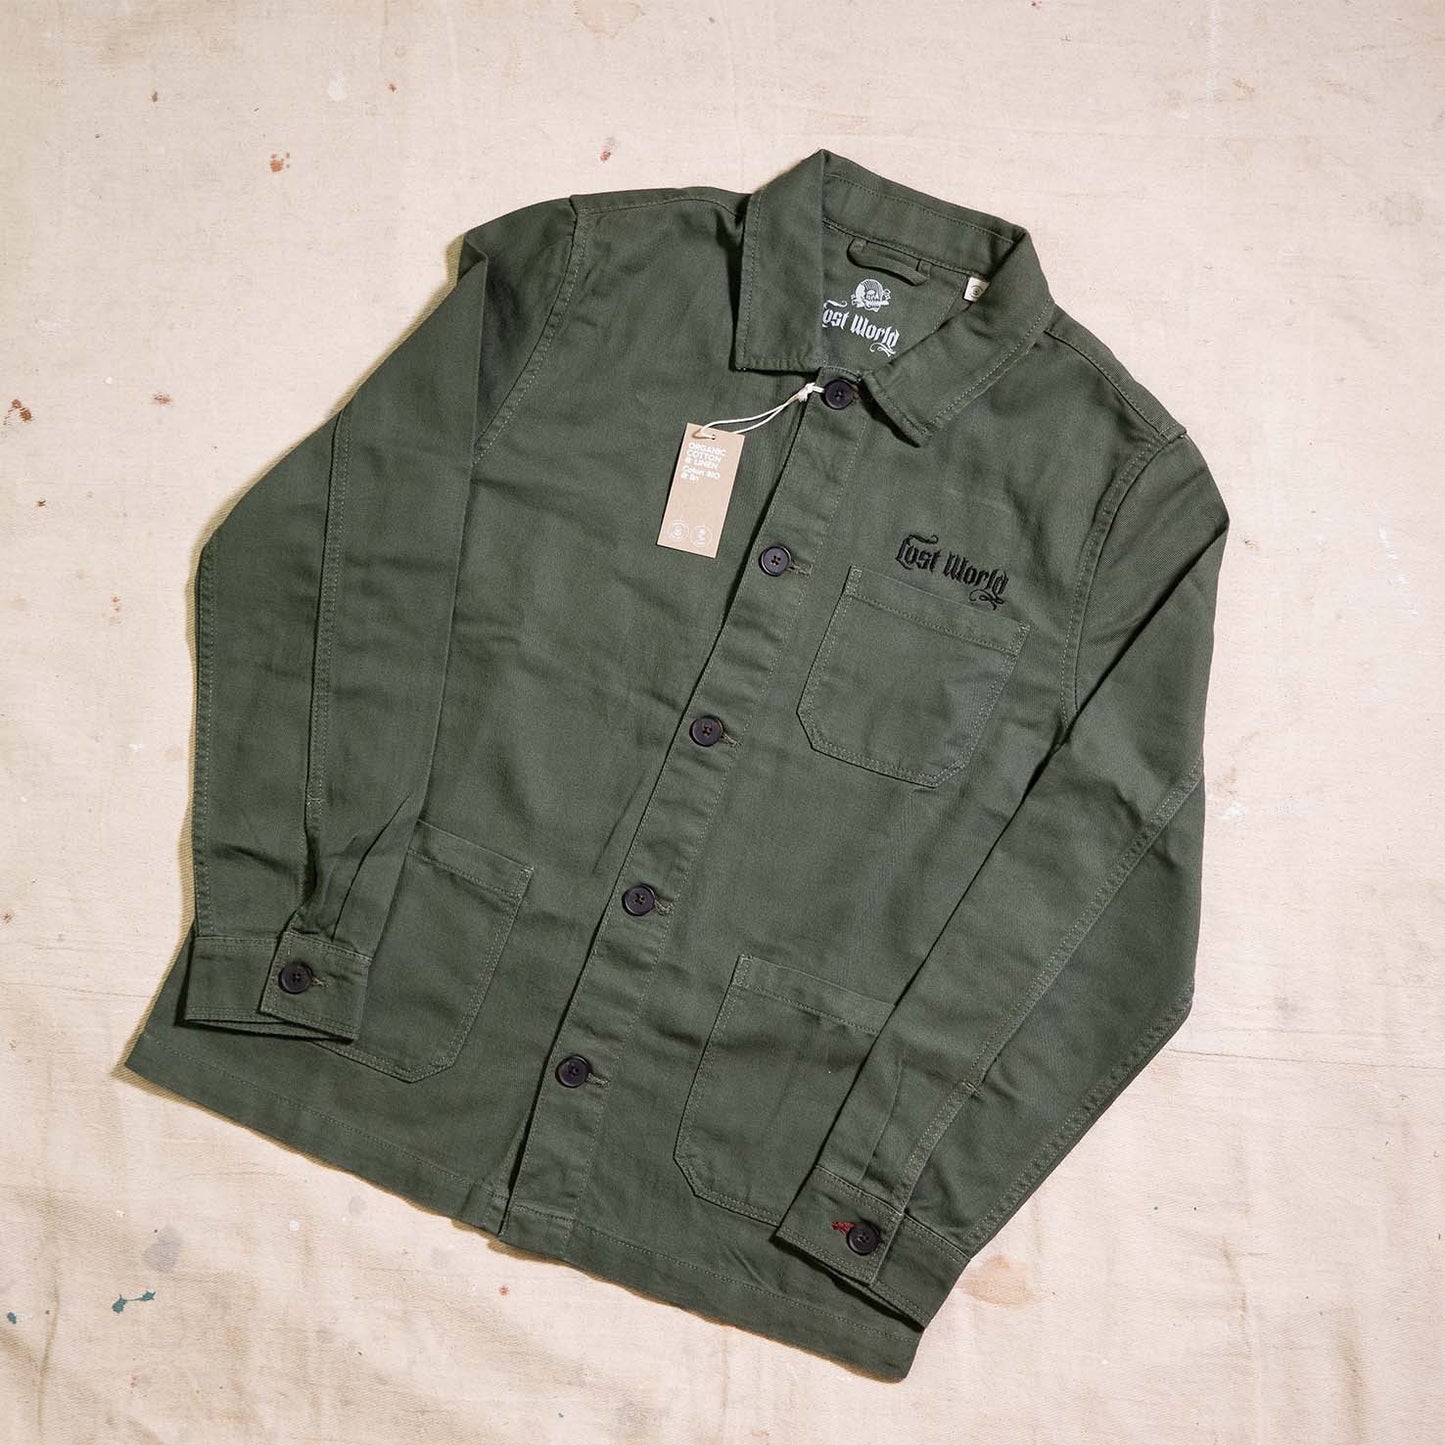 LW Khaki Green Embroidered Worker Jacket